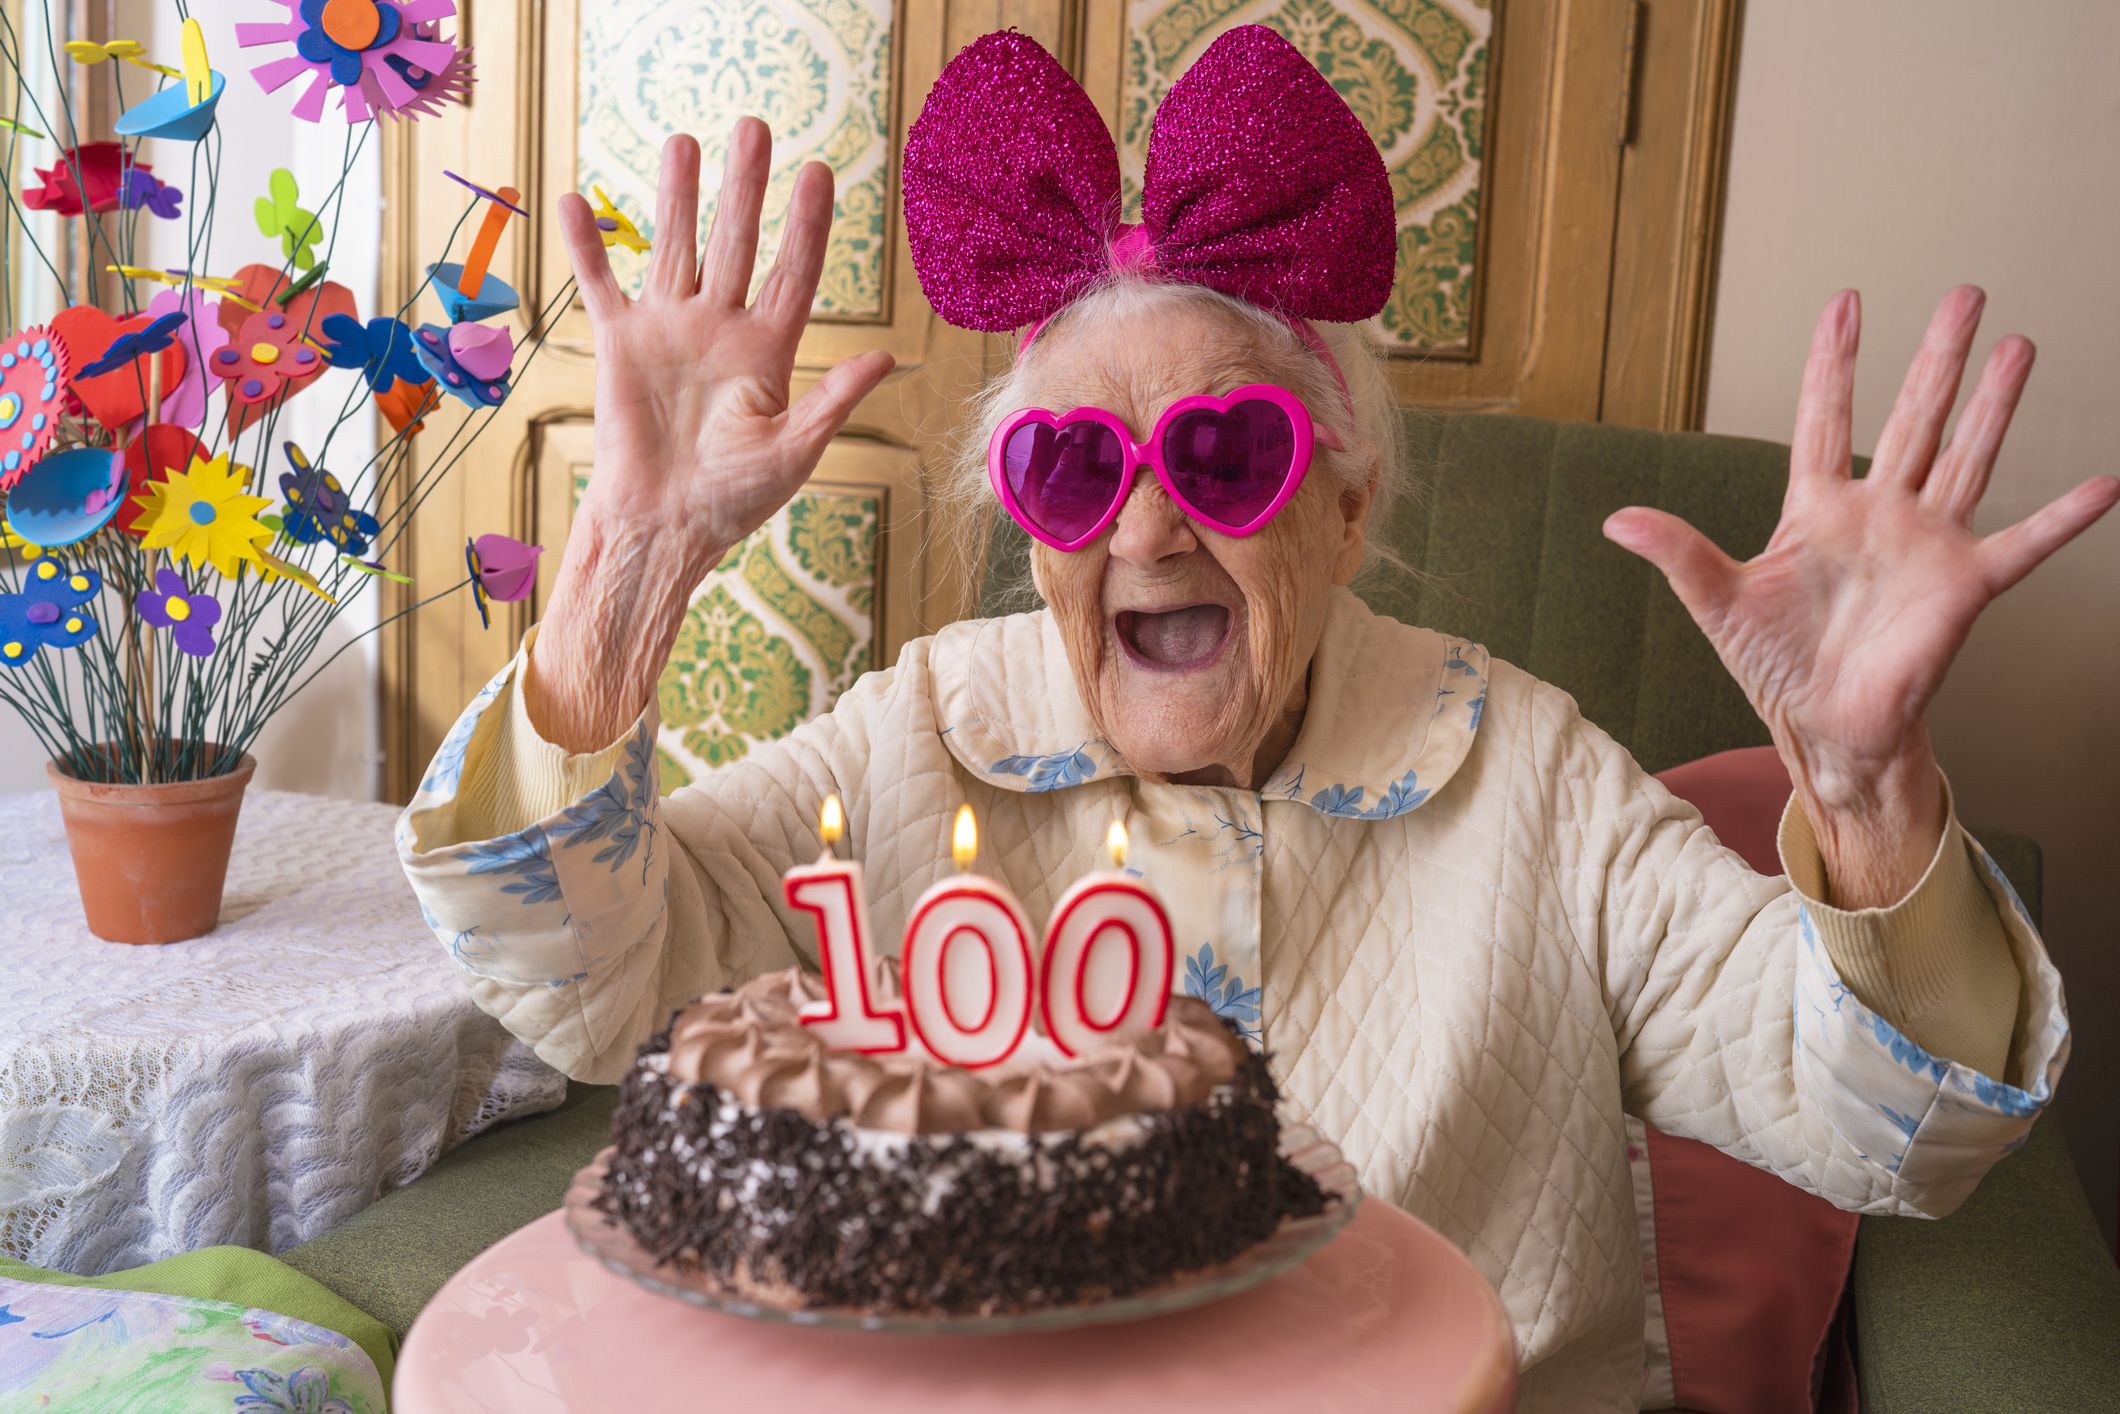 Turning 100? Your birthday present could possibly be an surprising tax